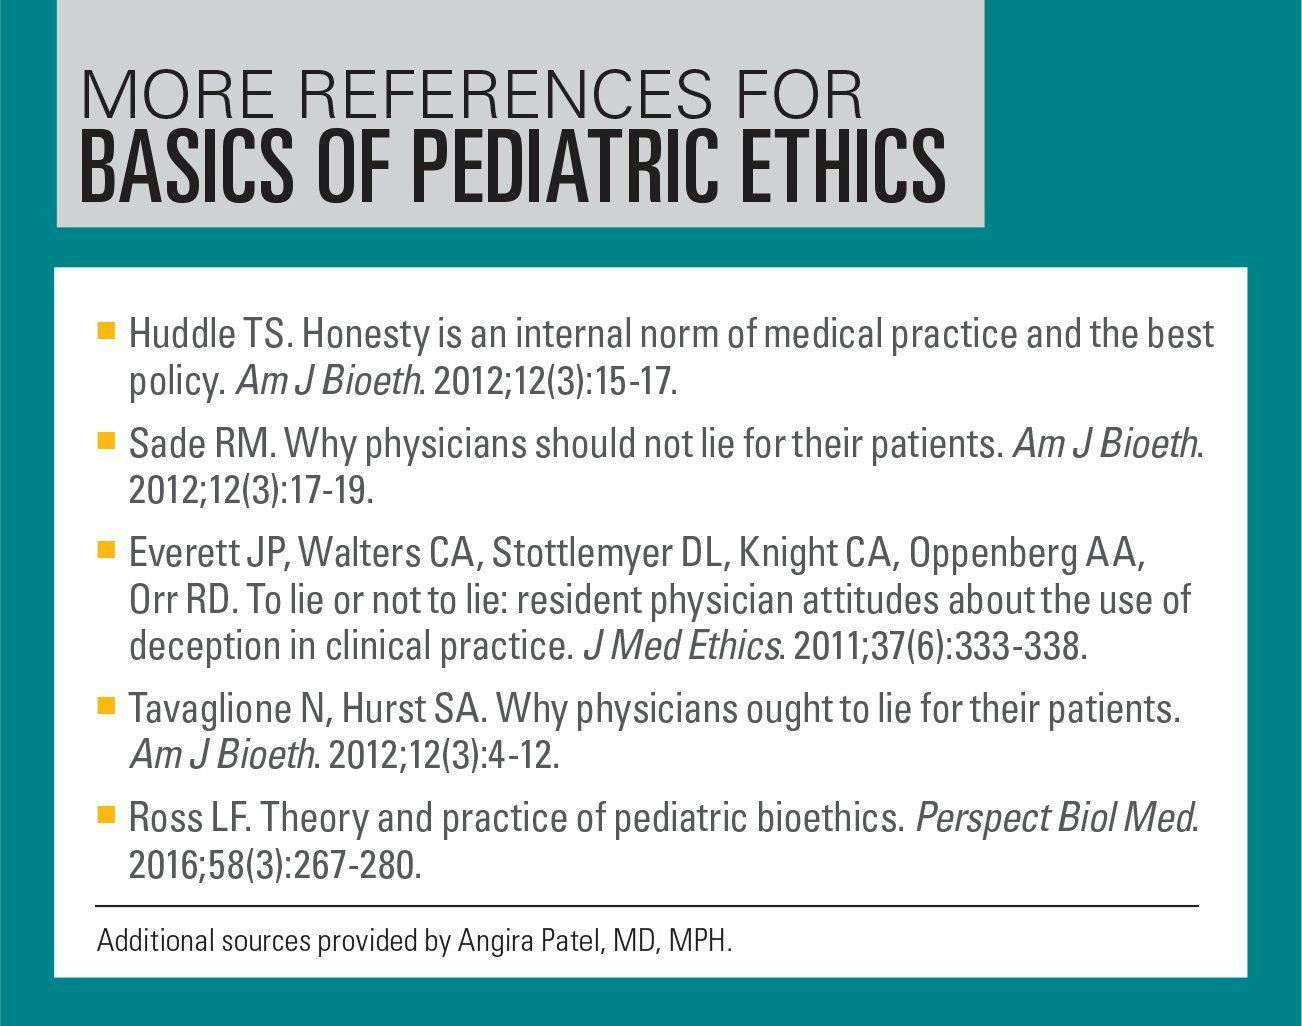 More references for basics of pediatric ethics